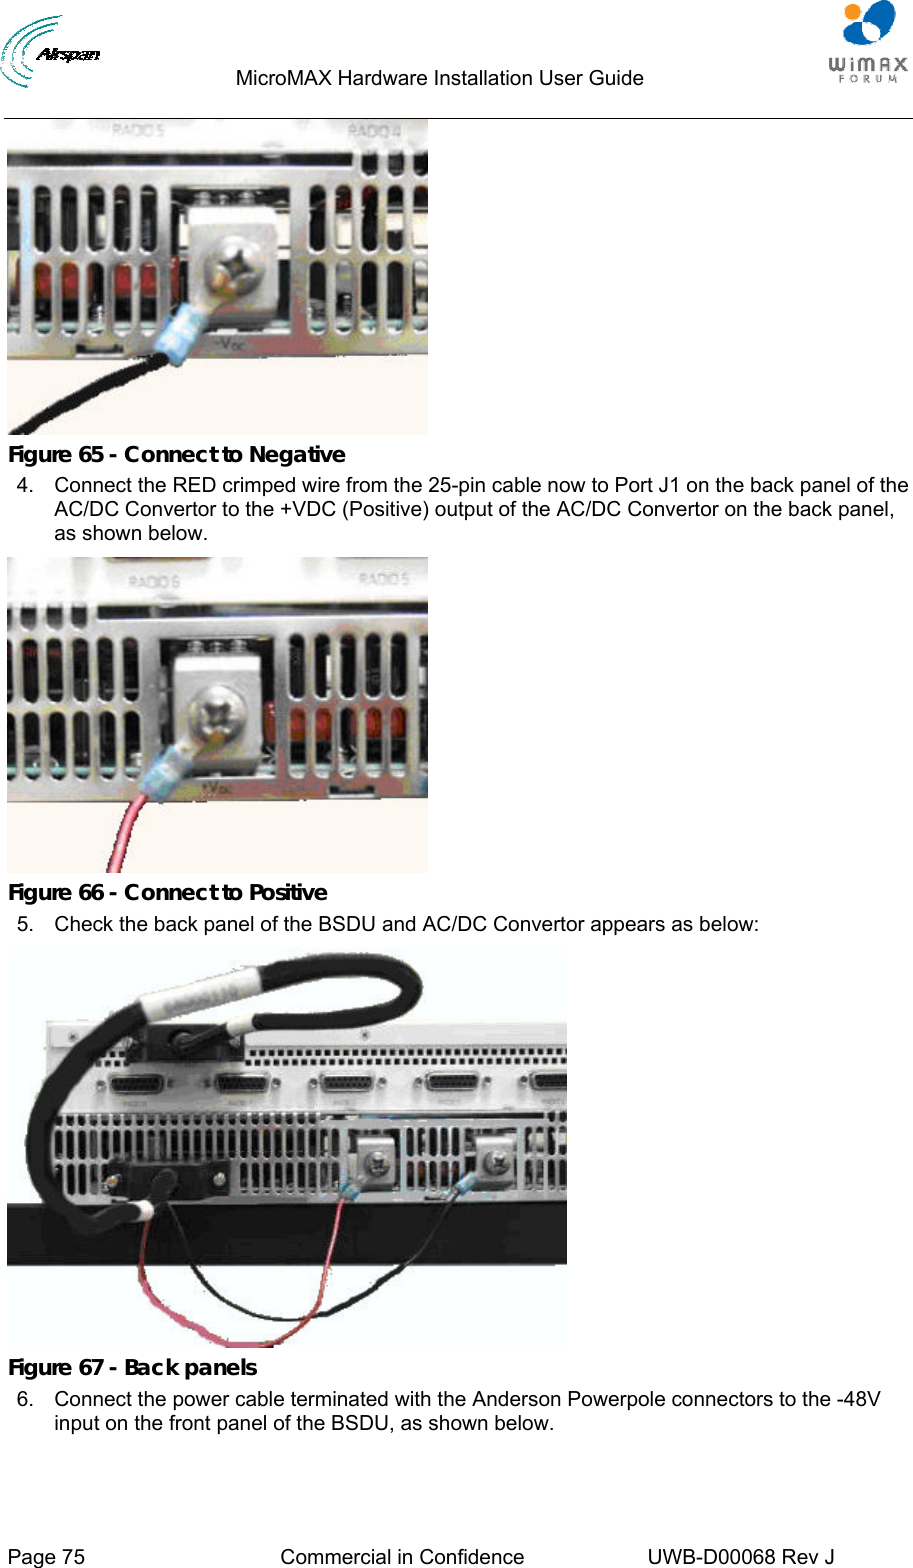                                  MicroMAX Hardware Installation User Guide     Page 75  Commercial in Confidence  UWB-D00068 Rev J    Figure 65 - Connect to Negative 4.  Connect the RED crimped wire from the 25-pin cable now to Port J1 on the back panel of the AC/DC Convertor to the +VDC (Positive) output of the AC/DC Convertor on the back panel, as shown below.  Figure 66 - Connect to Positive 5.  Check the back panel of the BSDU and AC/DC Convertor appears as below:  Figure 67 - Back panels 6.  Connect the power cable terminated with the Anderson Powerpole connectors to the -48V input on the front panel of the BSDU, as shown below. 